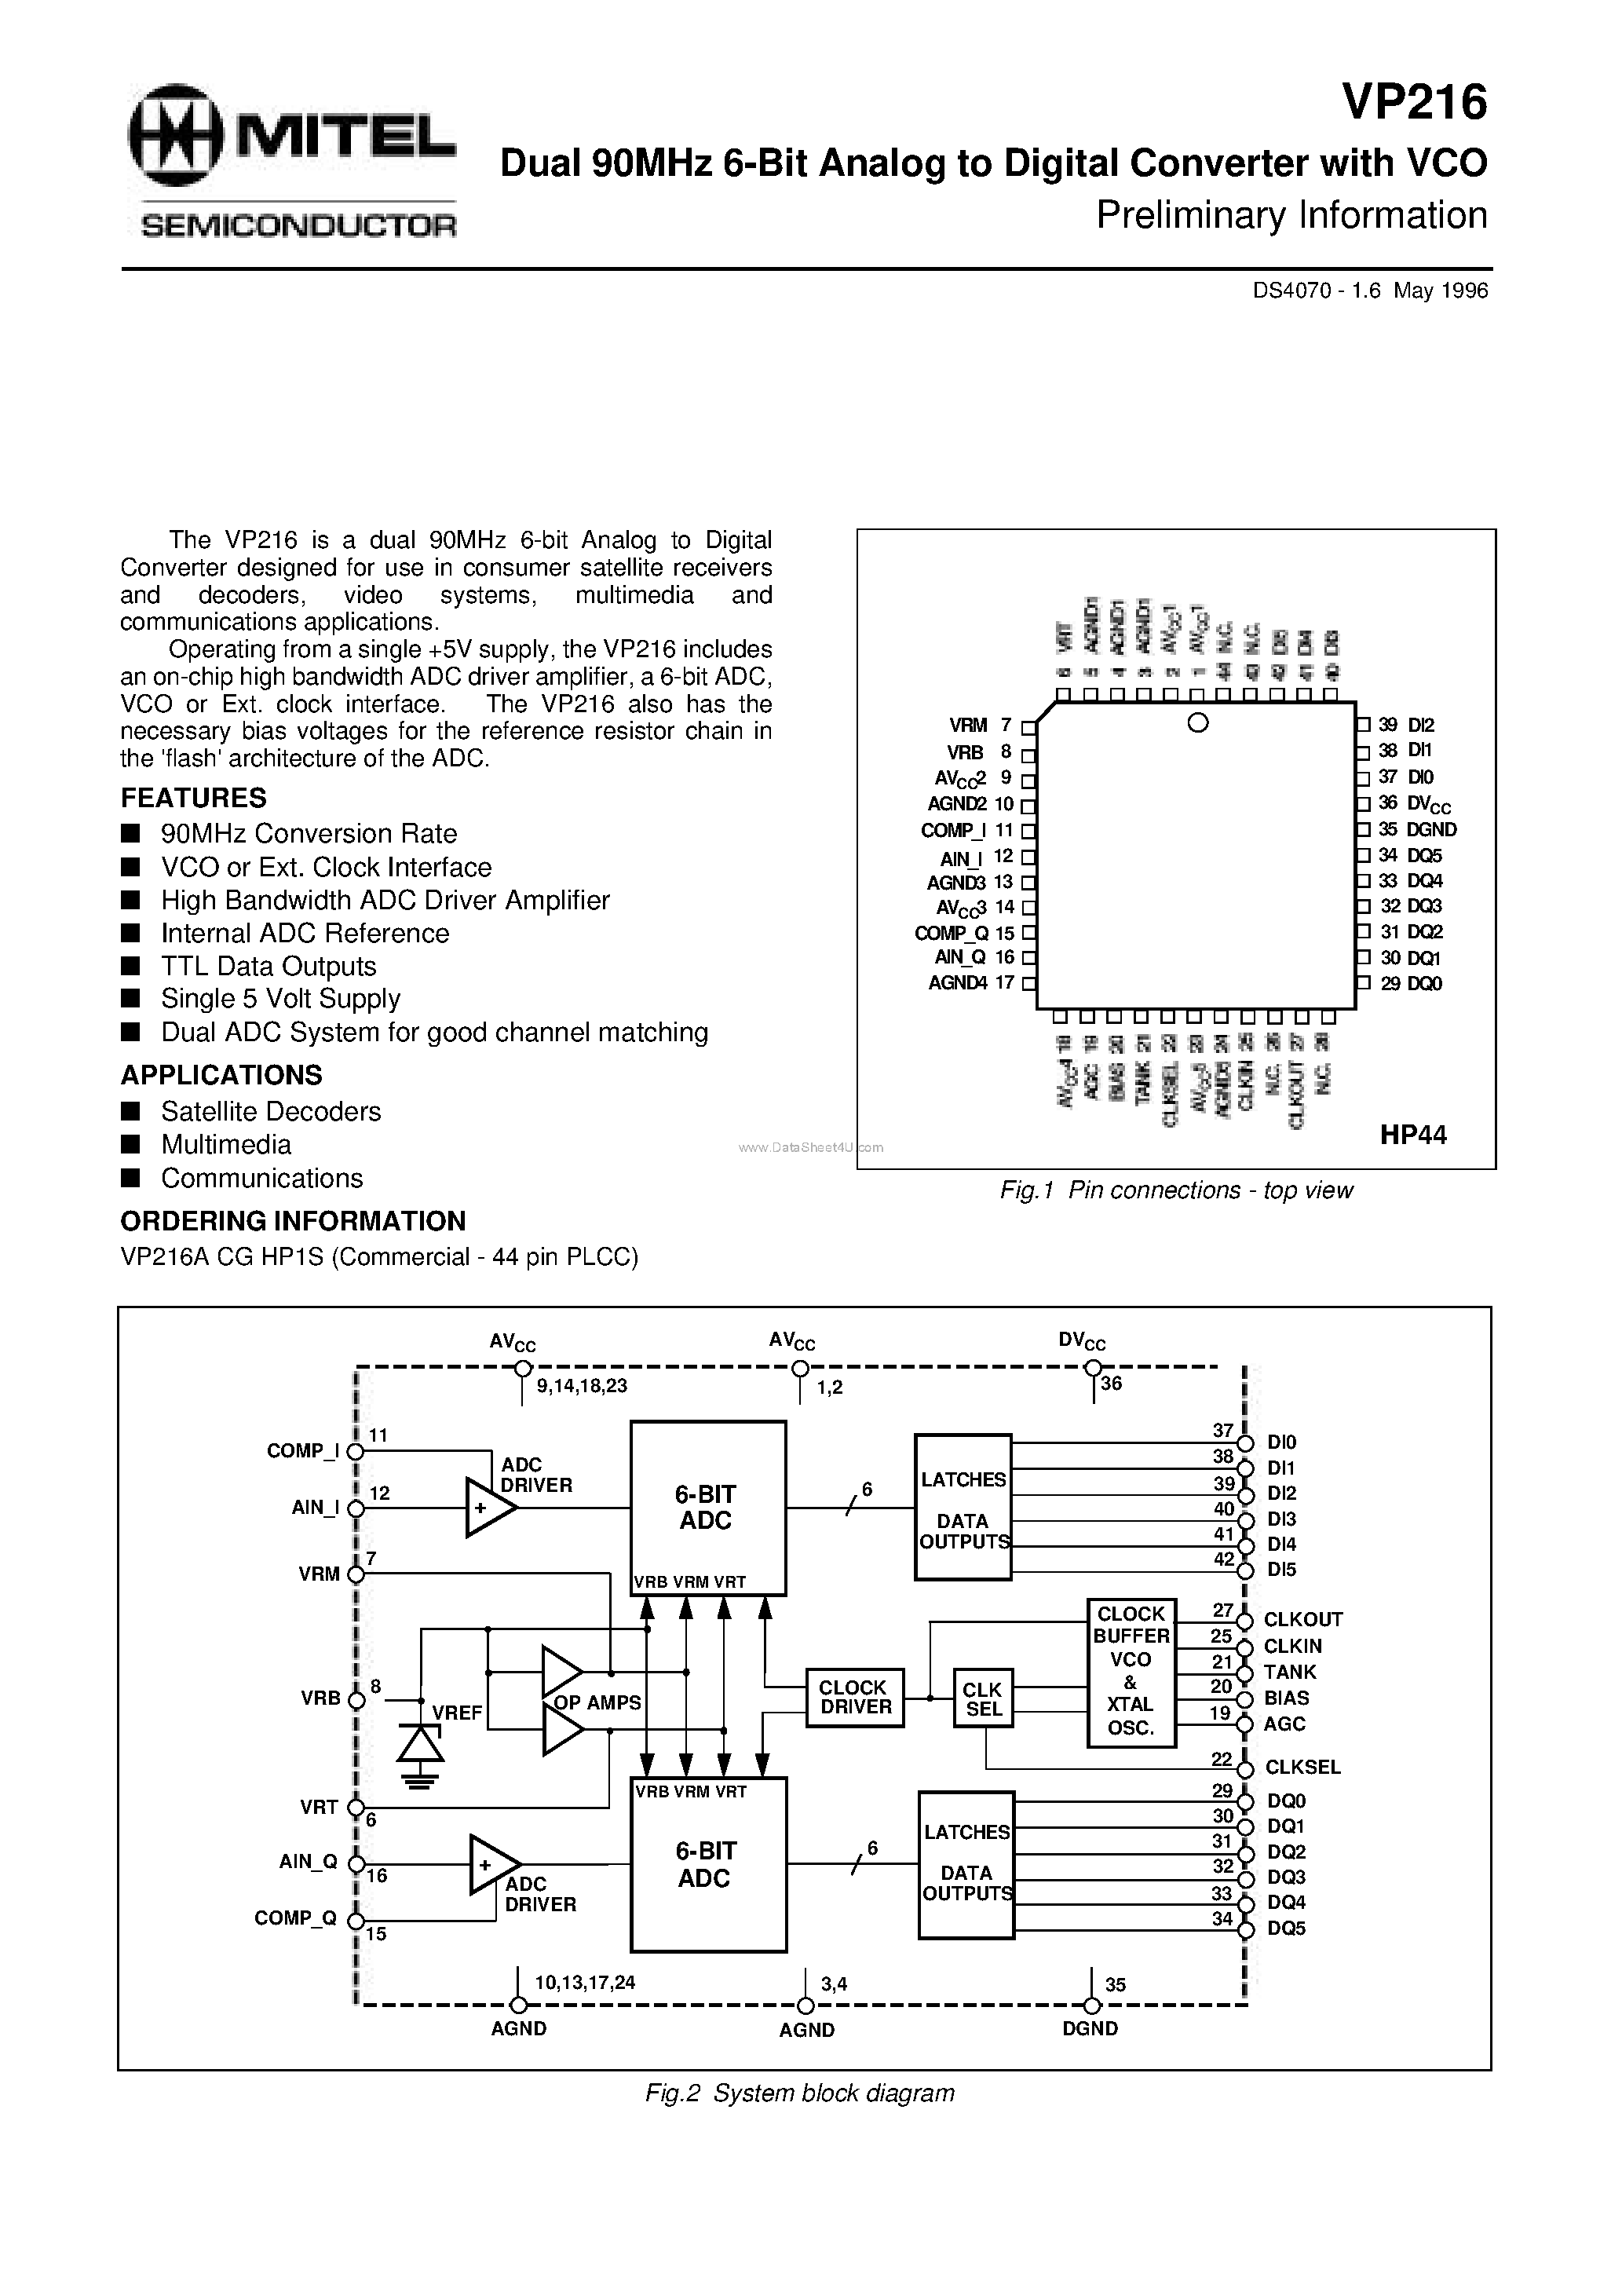 Datasheet VP216 - Dual 90MHz 6-Bit Analog to Digital Converter with VCO page 1